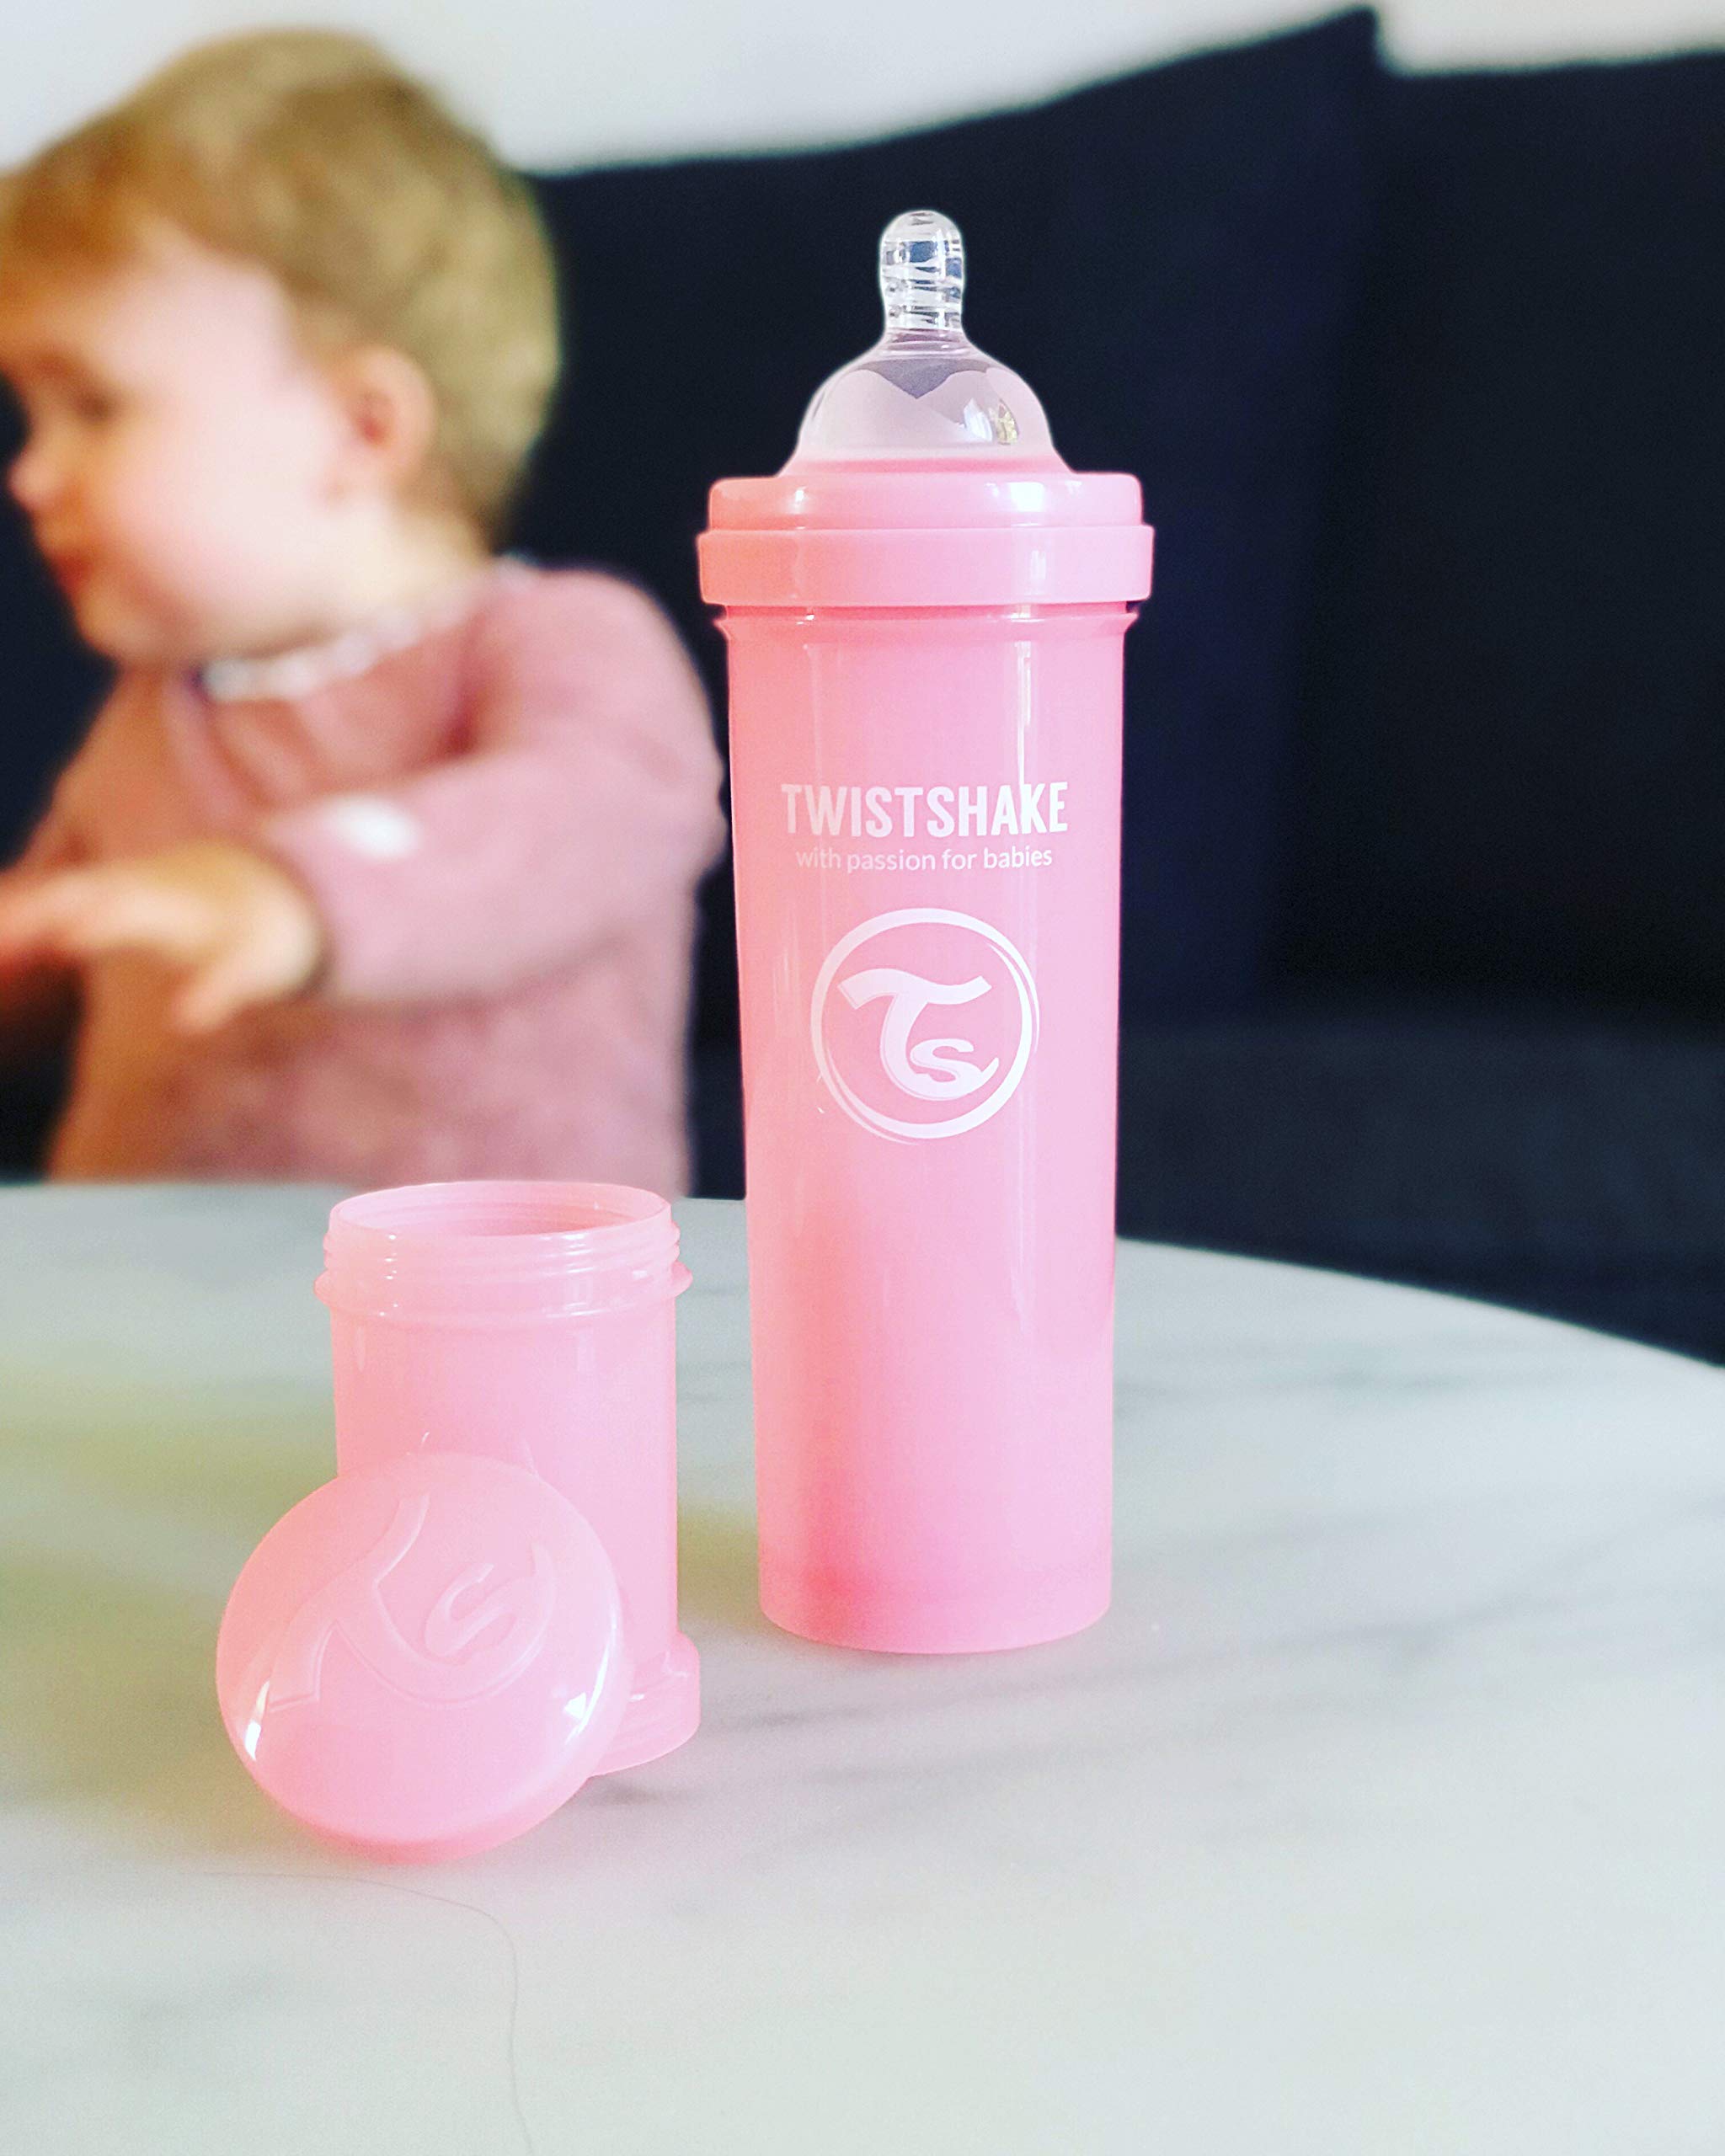 Twistshake Anti Colic Baby Bottles - Premium 330ml/11oz Bottles with 100ml Milk Storage Container for a Comfortable Feeding Experience for Baby Care - Pastel Pink